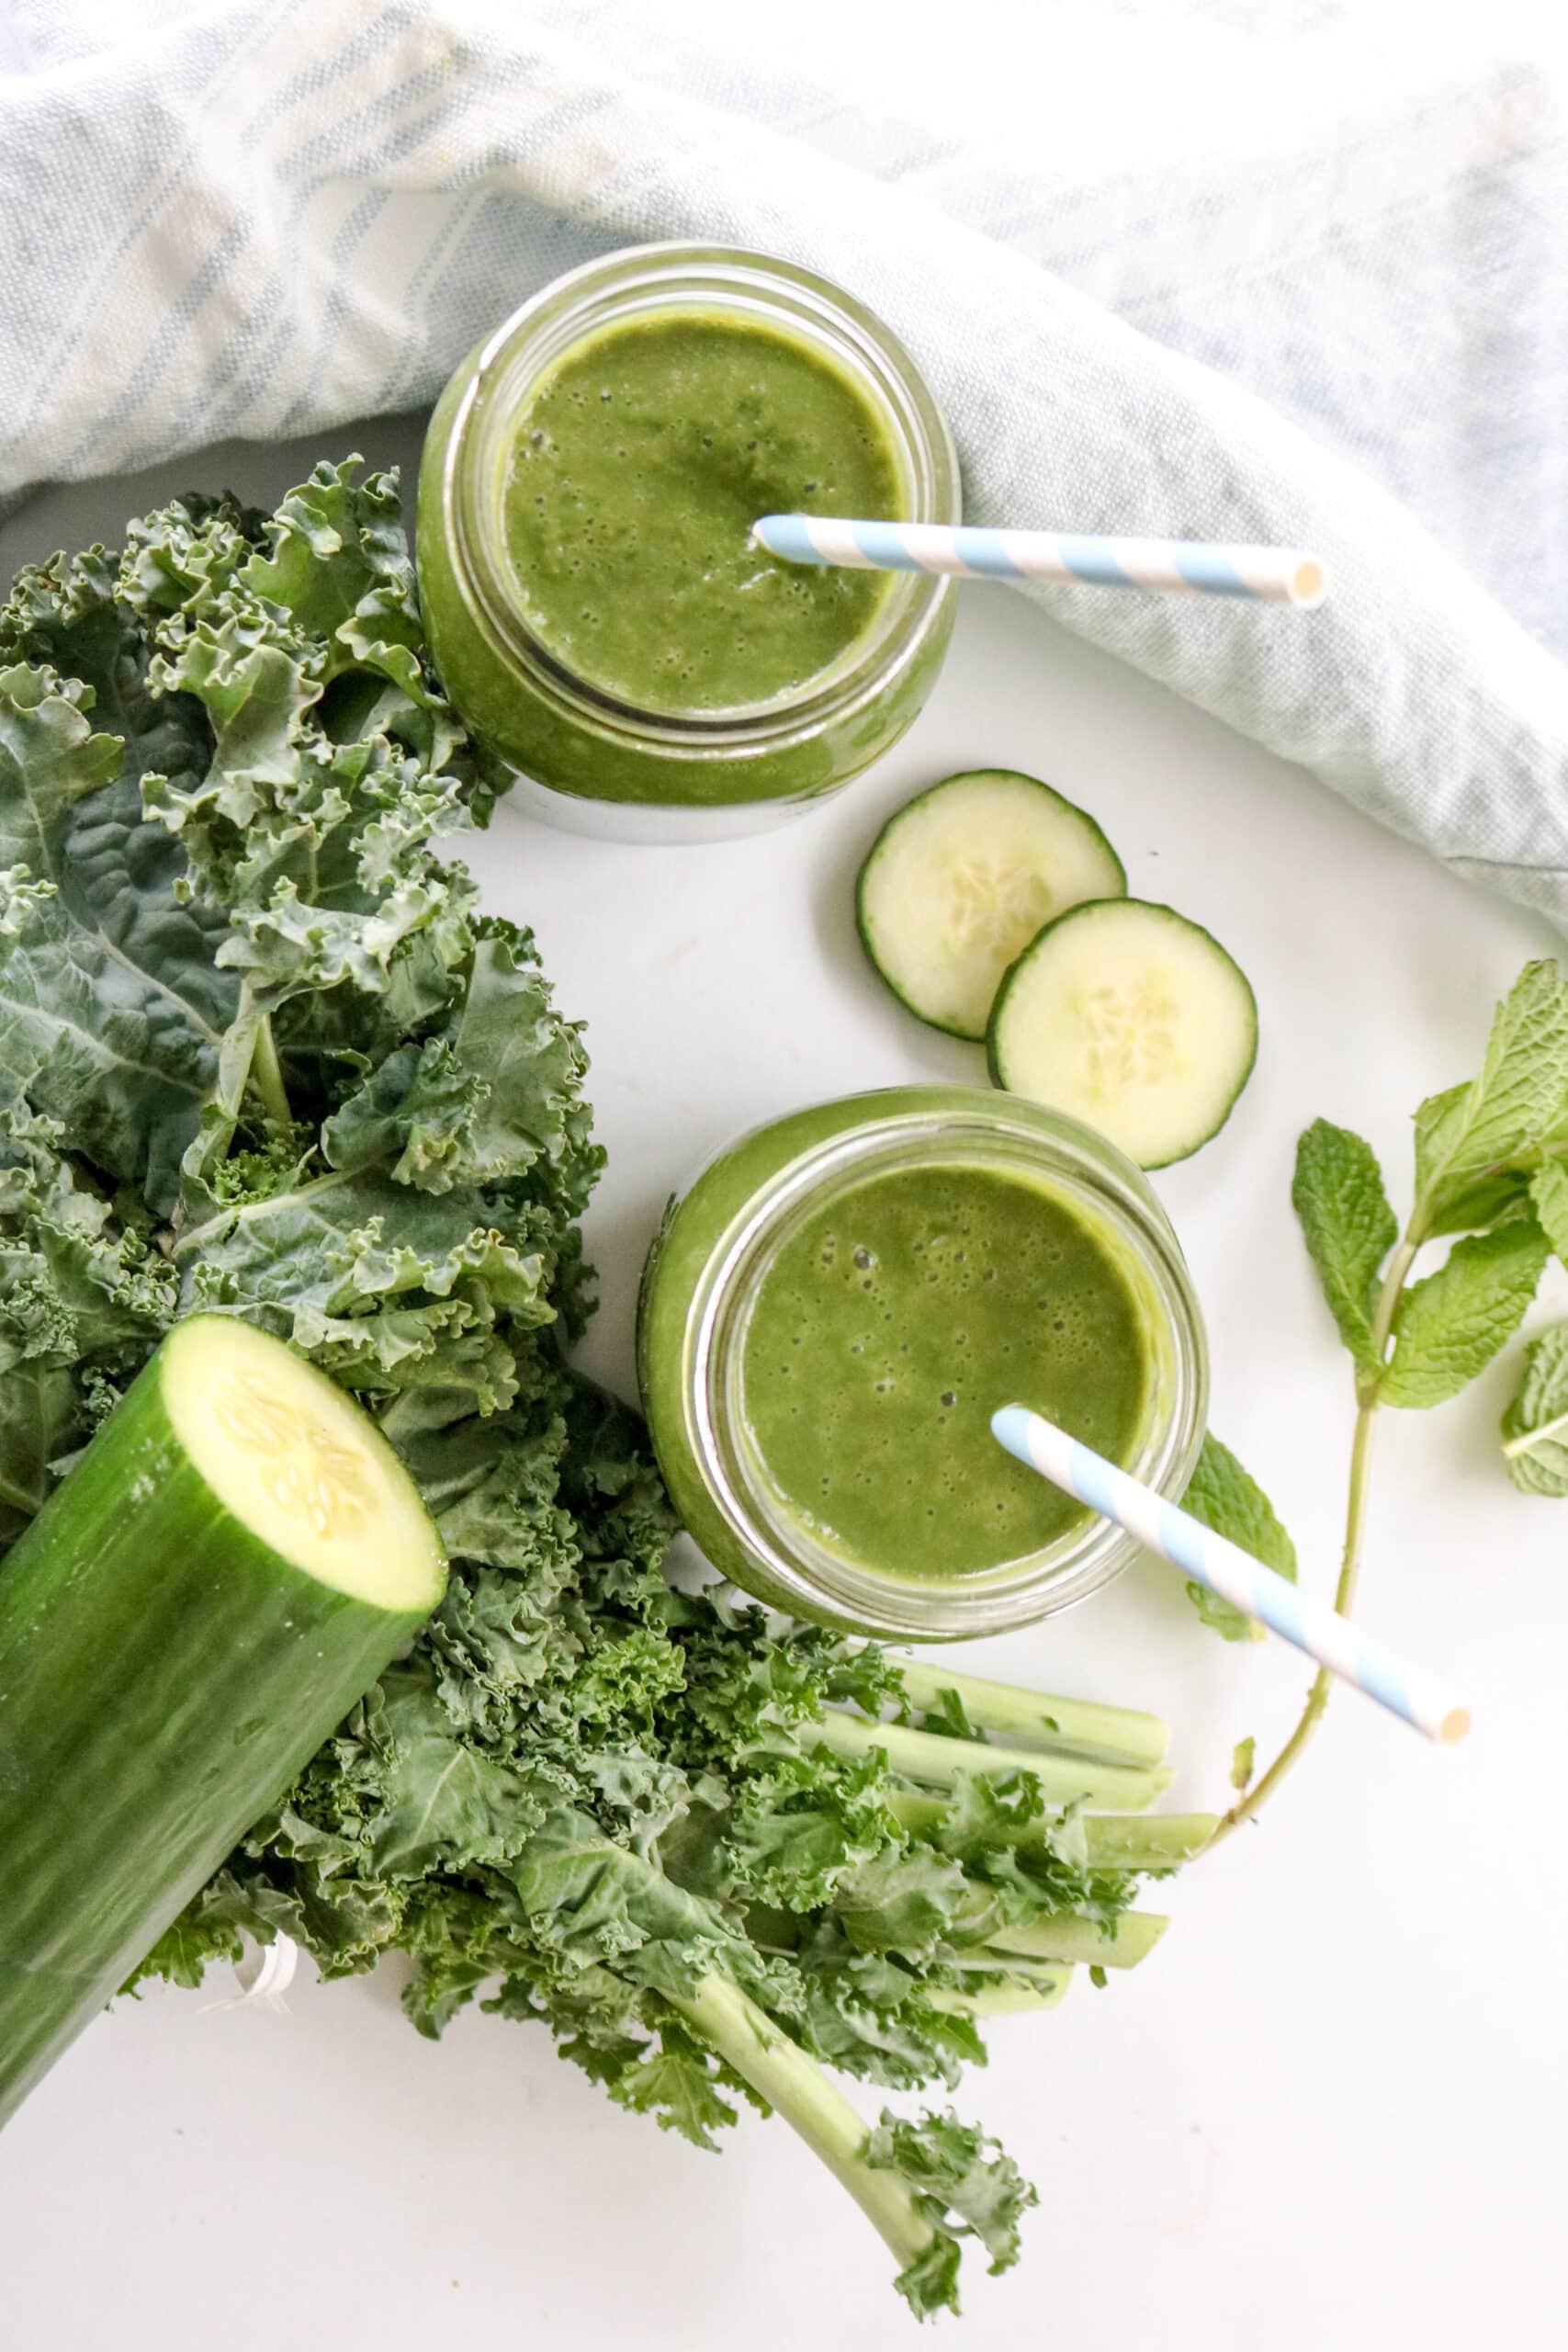 5 Green Juice Recipes for Glowing Skin - Ingredients and preparation for spinach and kale green juice